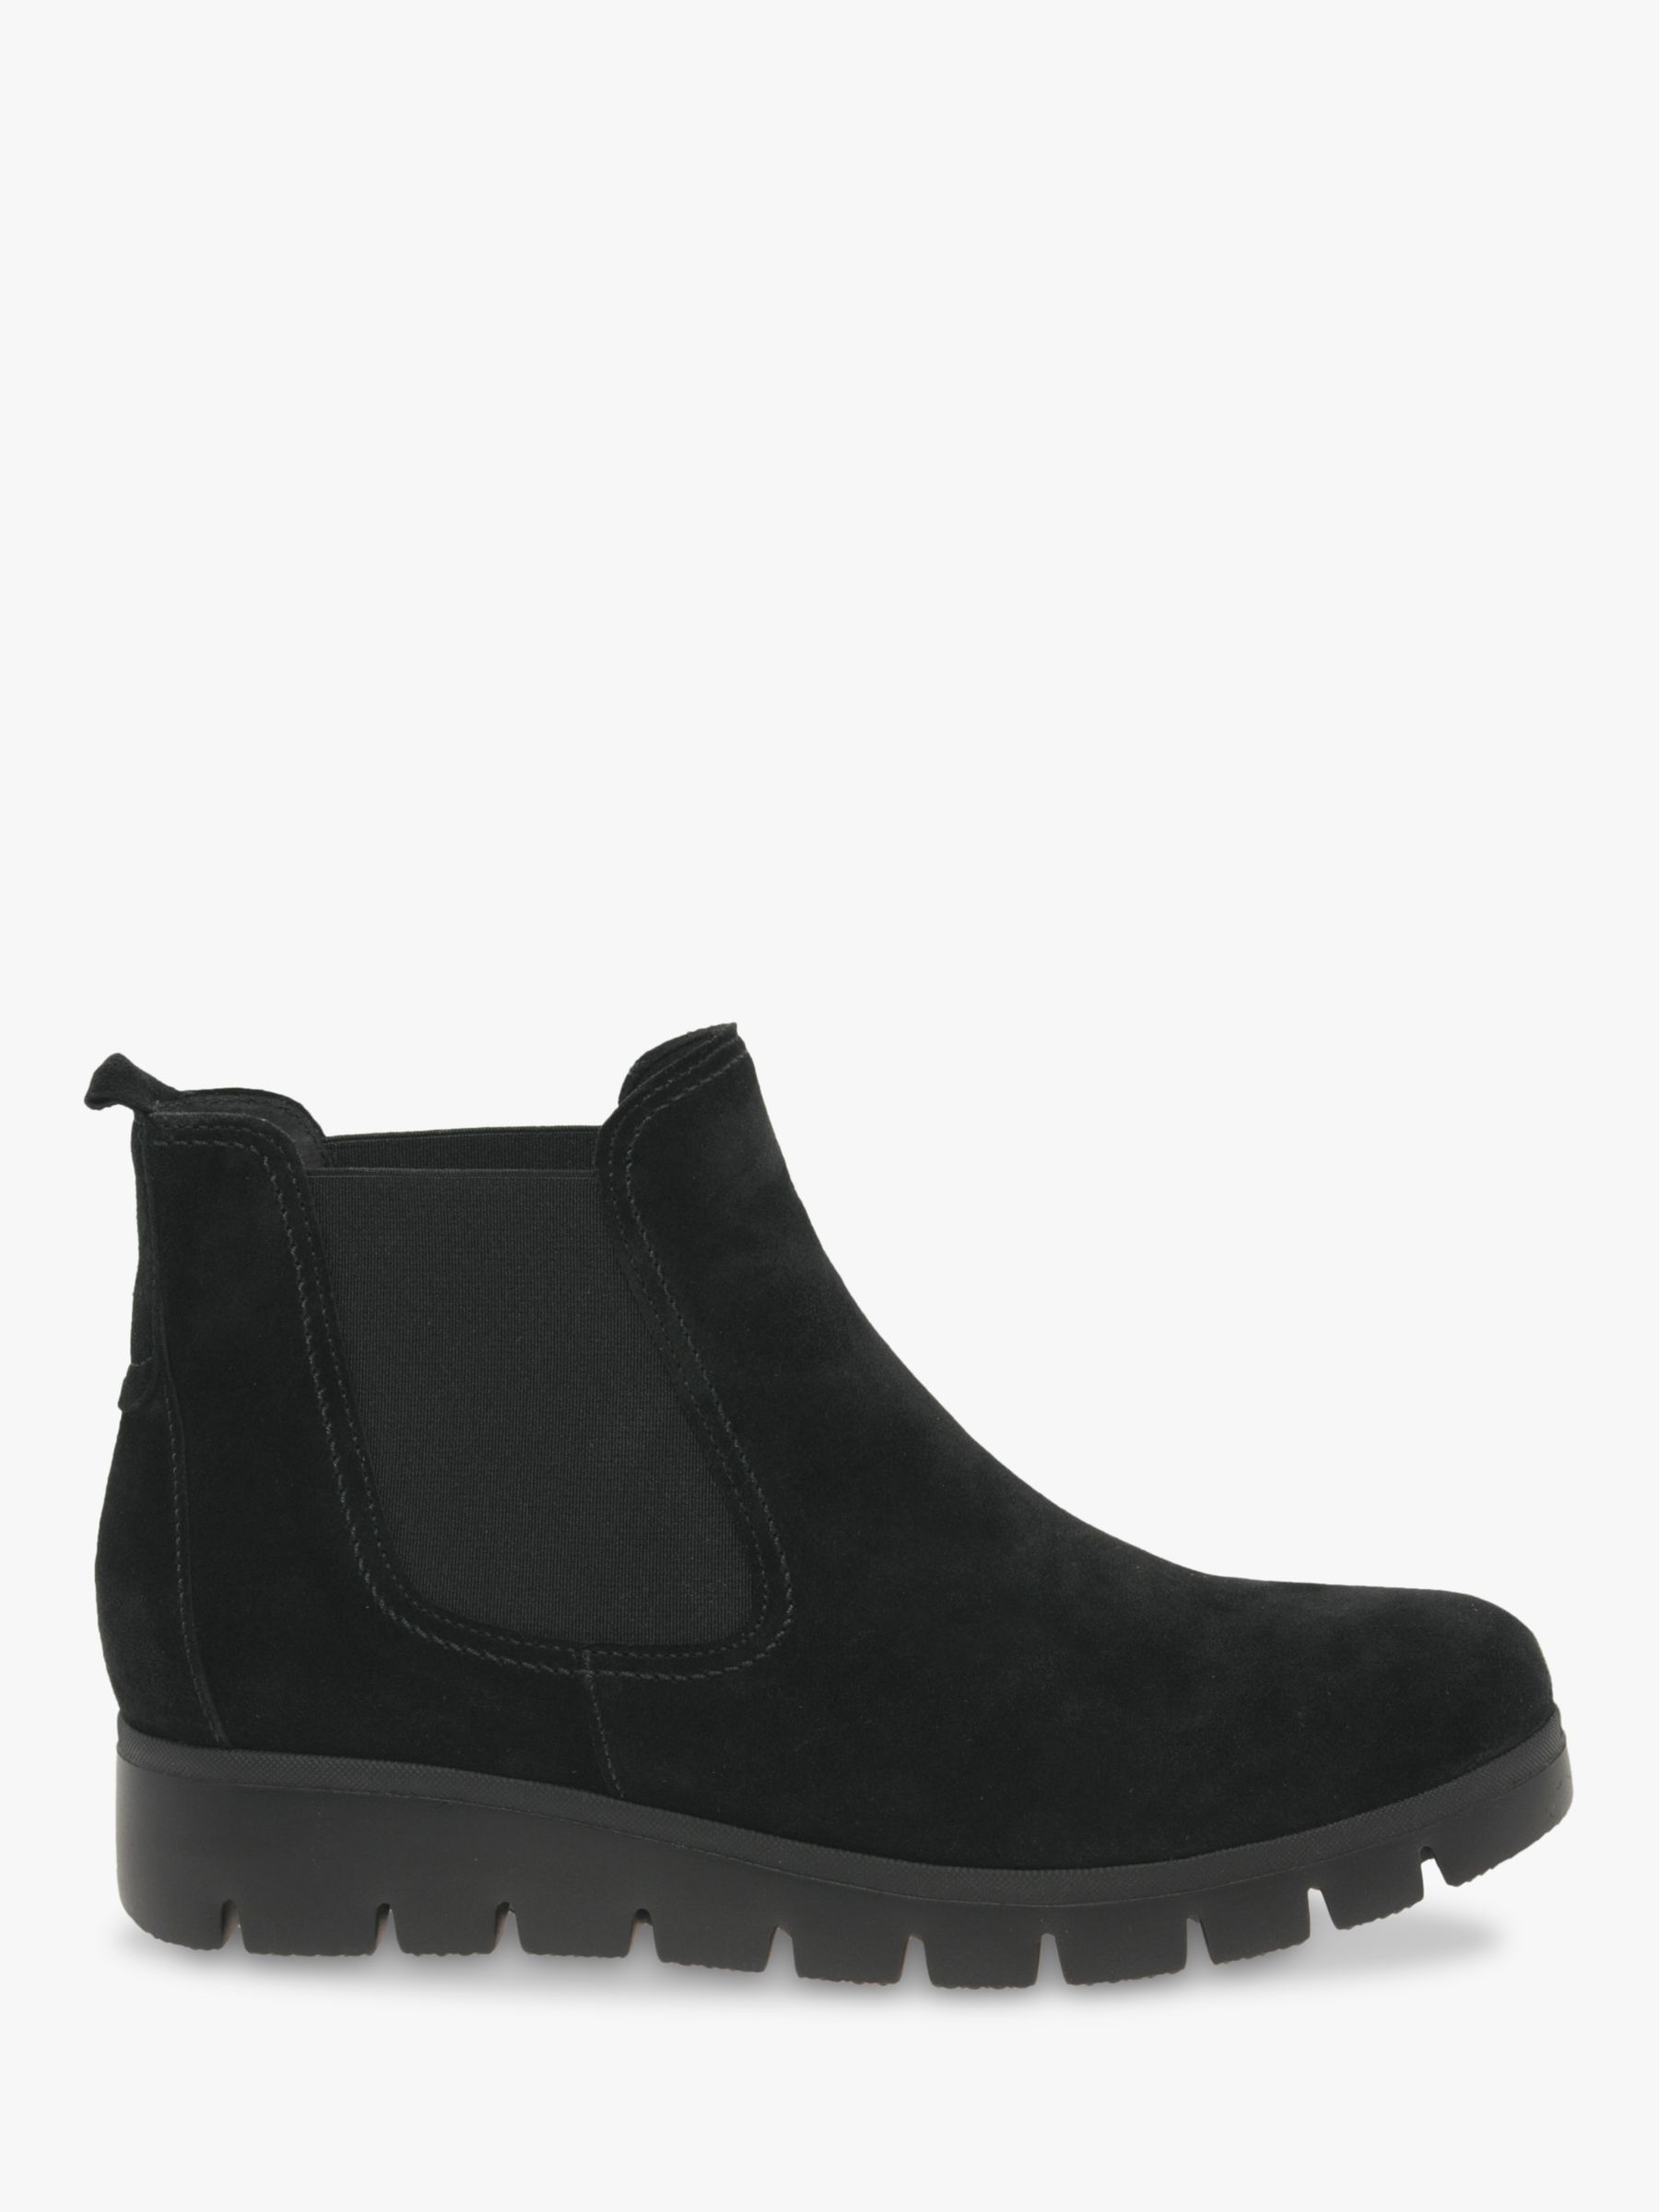 Gabor Ranch Suede Chelsea Boots, Black at John Lewis & Partners